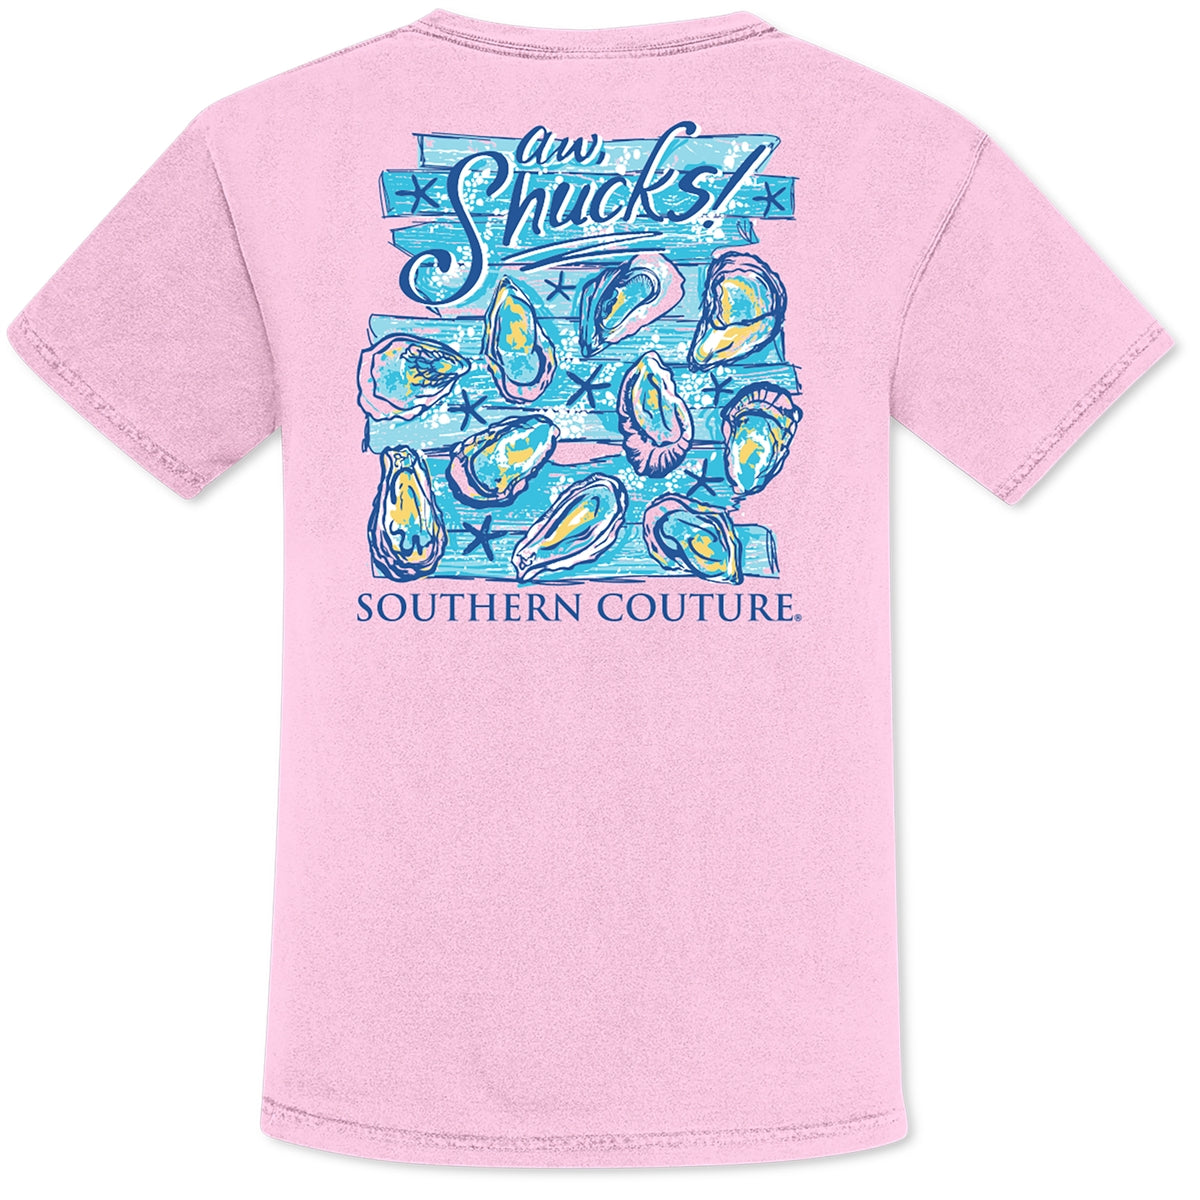 Southern Couture Aw Shucks Shells Comfort Colors T-Shirt